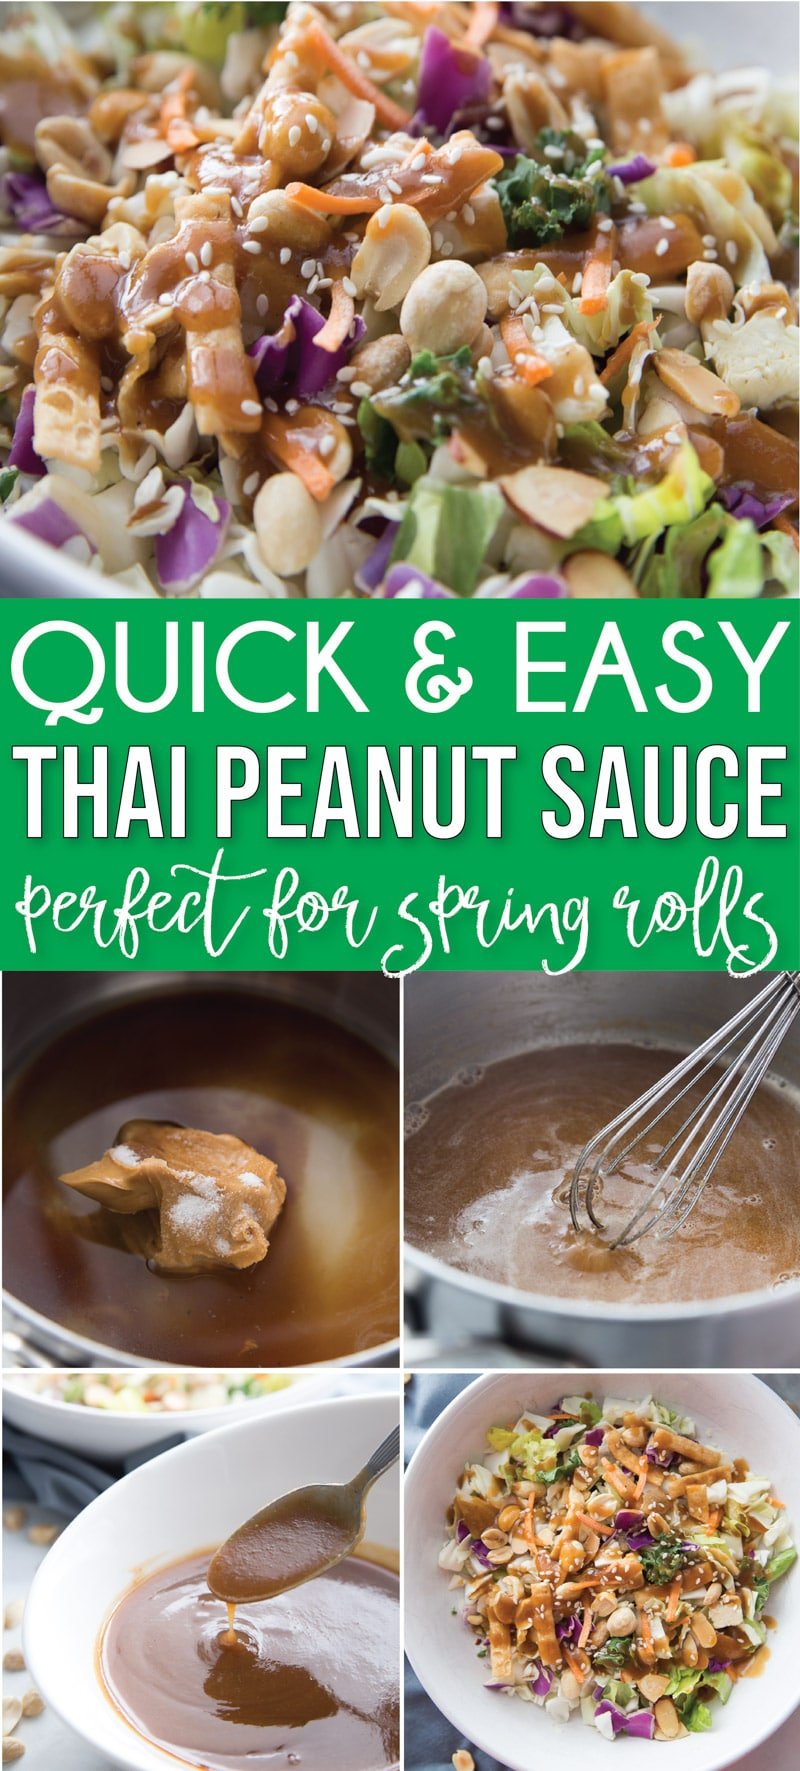 The best peanut sauce for springs rolls! An easy Thai peanut sauce recipe that’s great on noodles, on satay chicken, on Vietnamese noodle bowls, and more! So yummy!